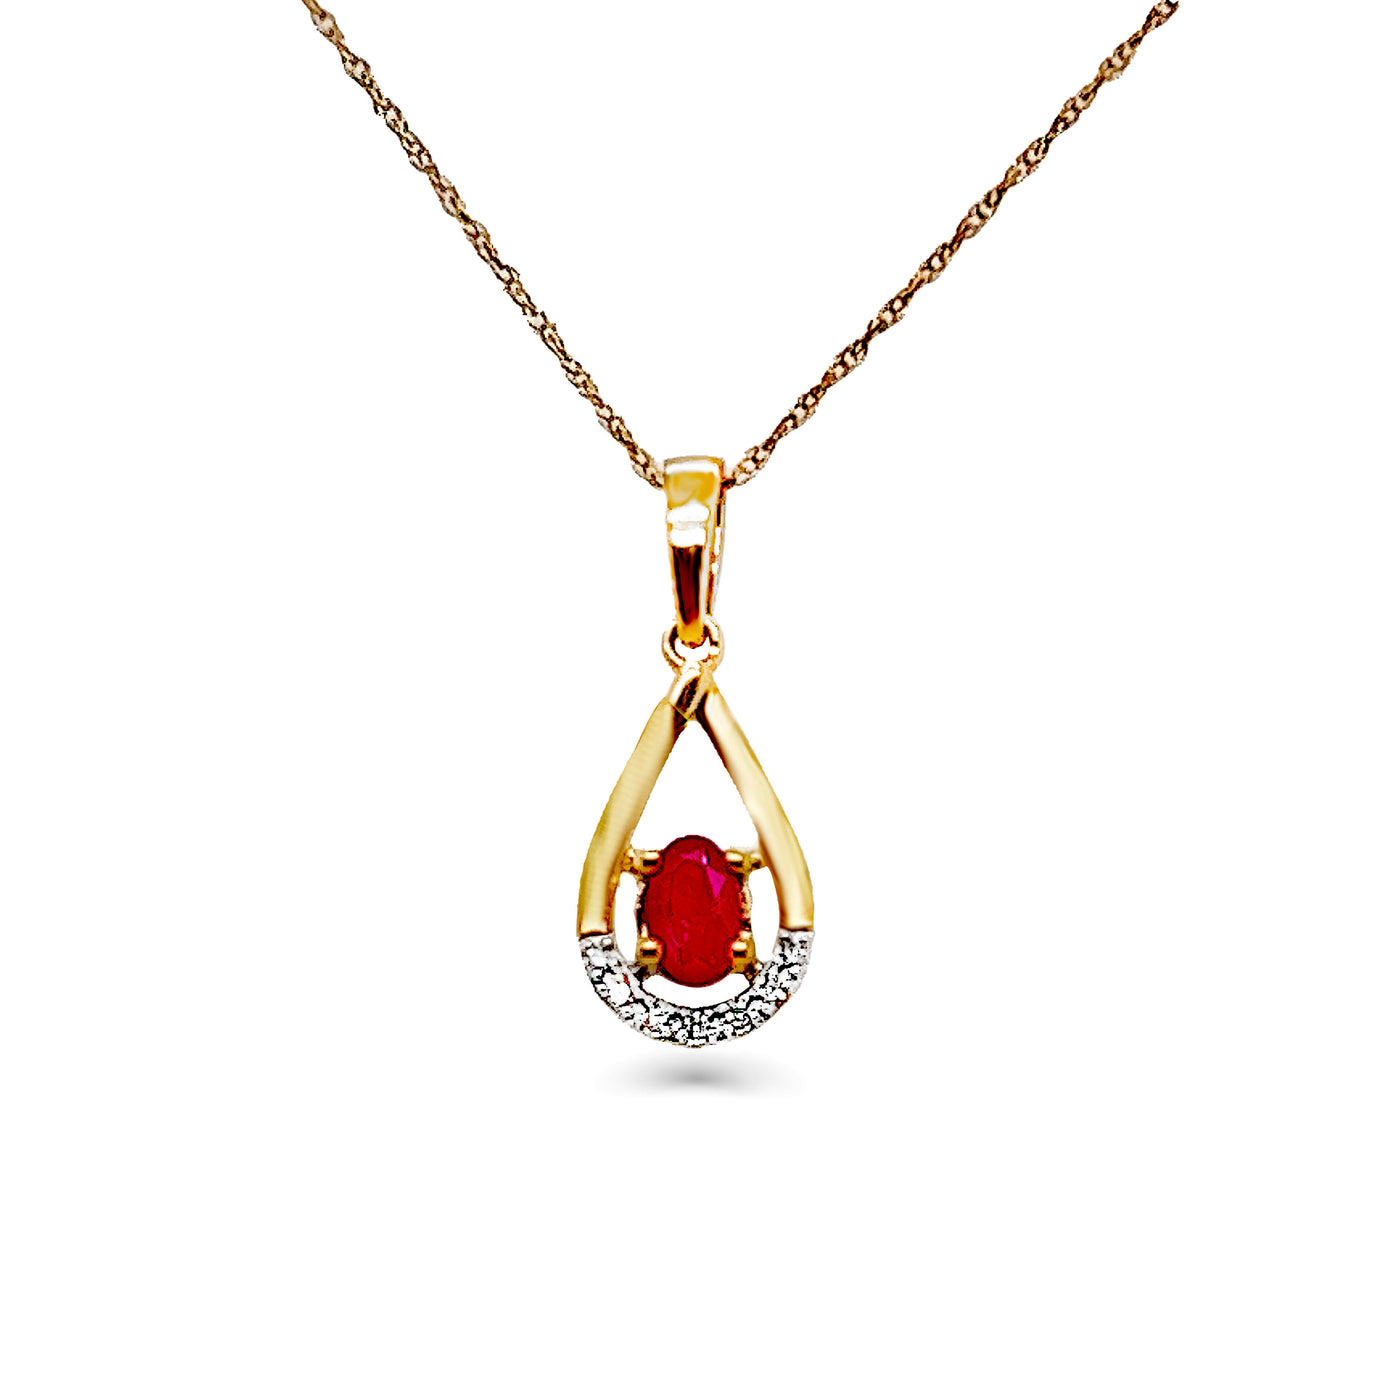 0.66 Ct Pear Cut Natural Red Ruby Teardrop Pendant Necklace in 14K Yellow  Gold | eBay